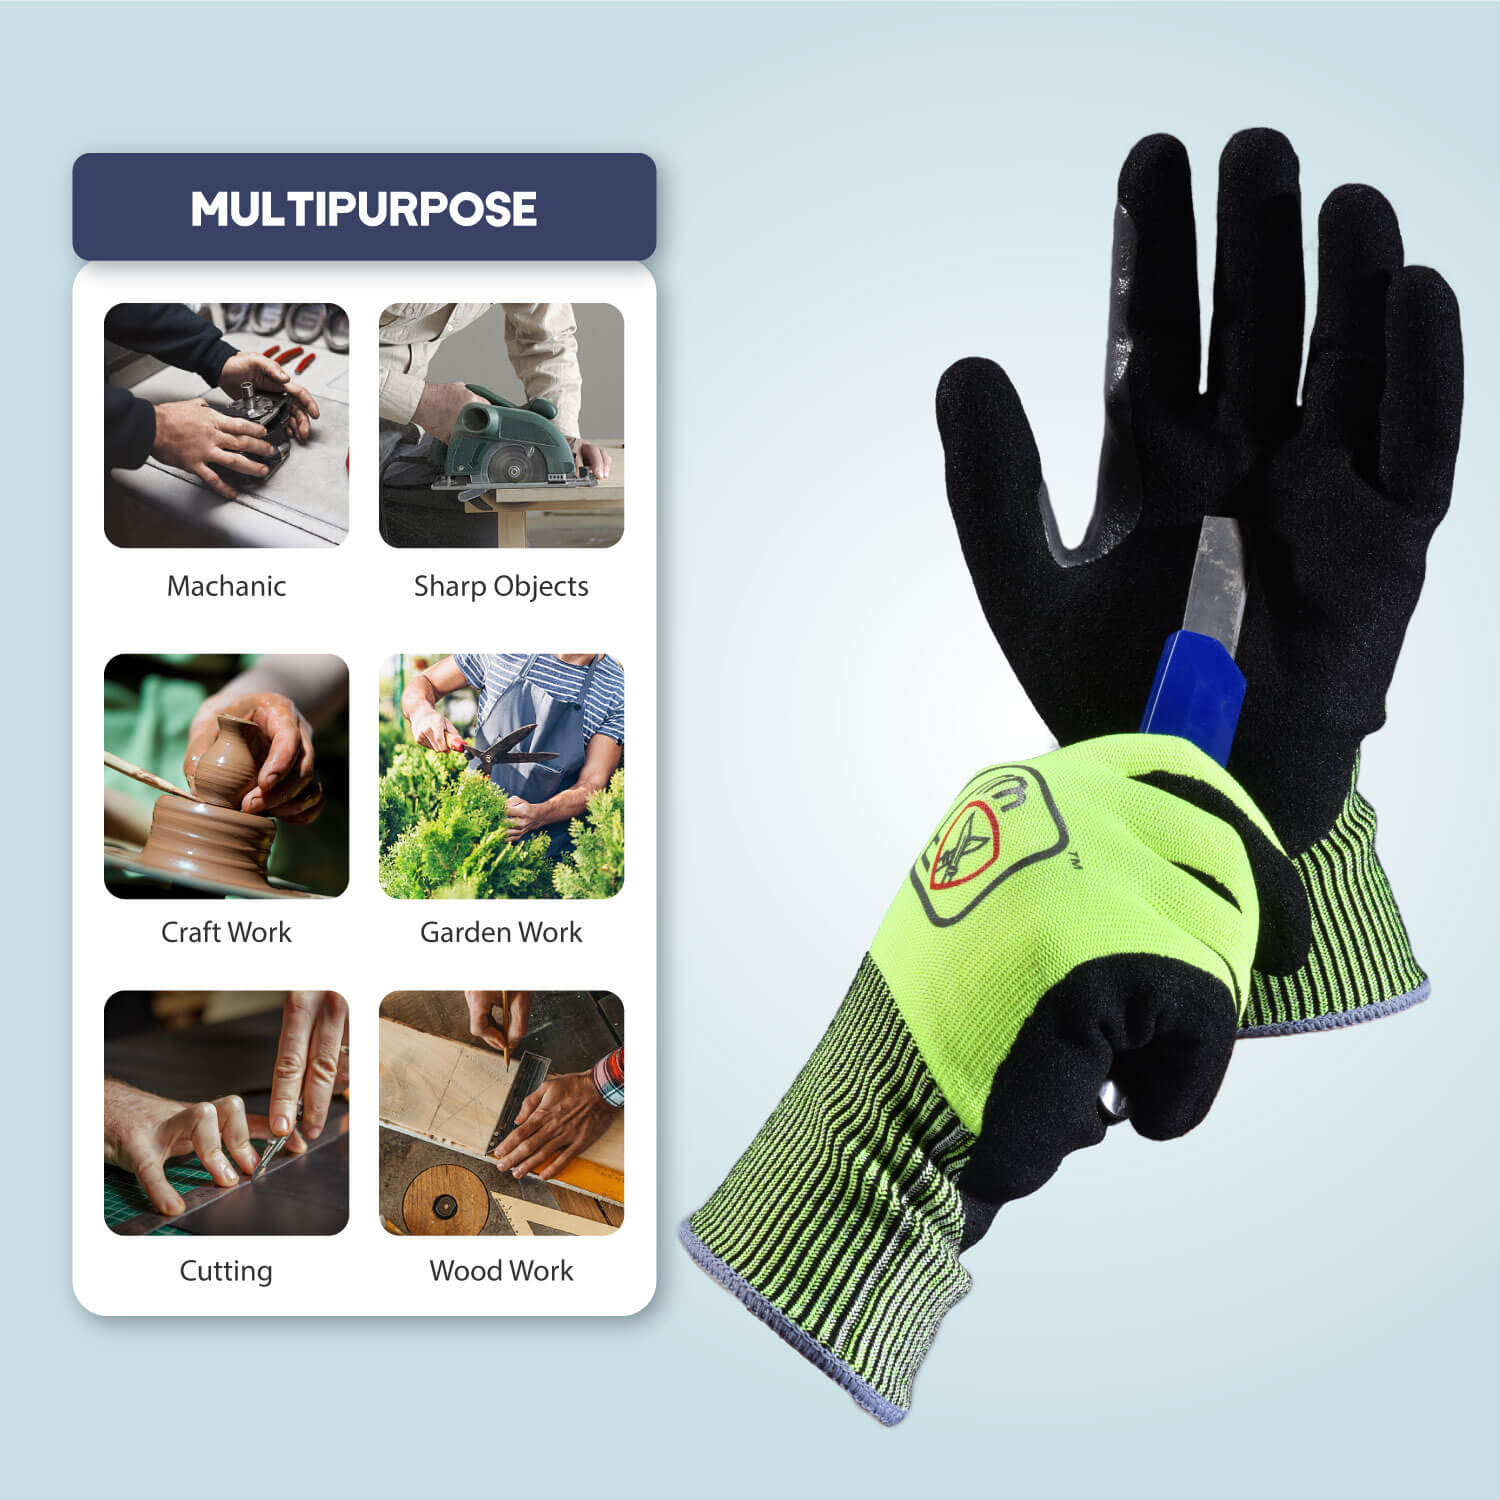 SAFEYEAR Cut Resistant Gloves,Strengthen Between The Thumb & Index Level 5 Protection